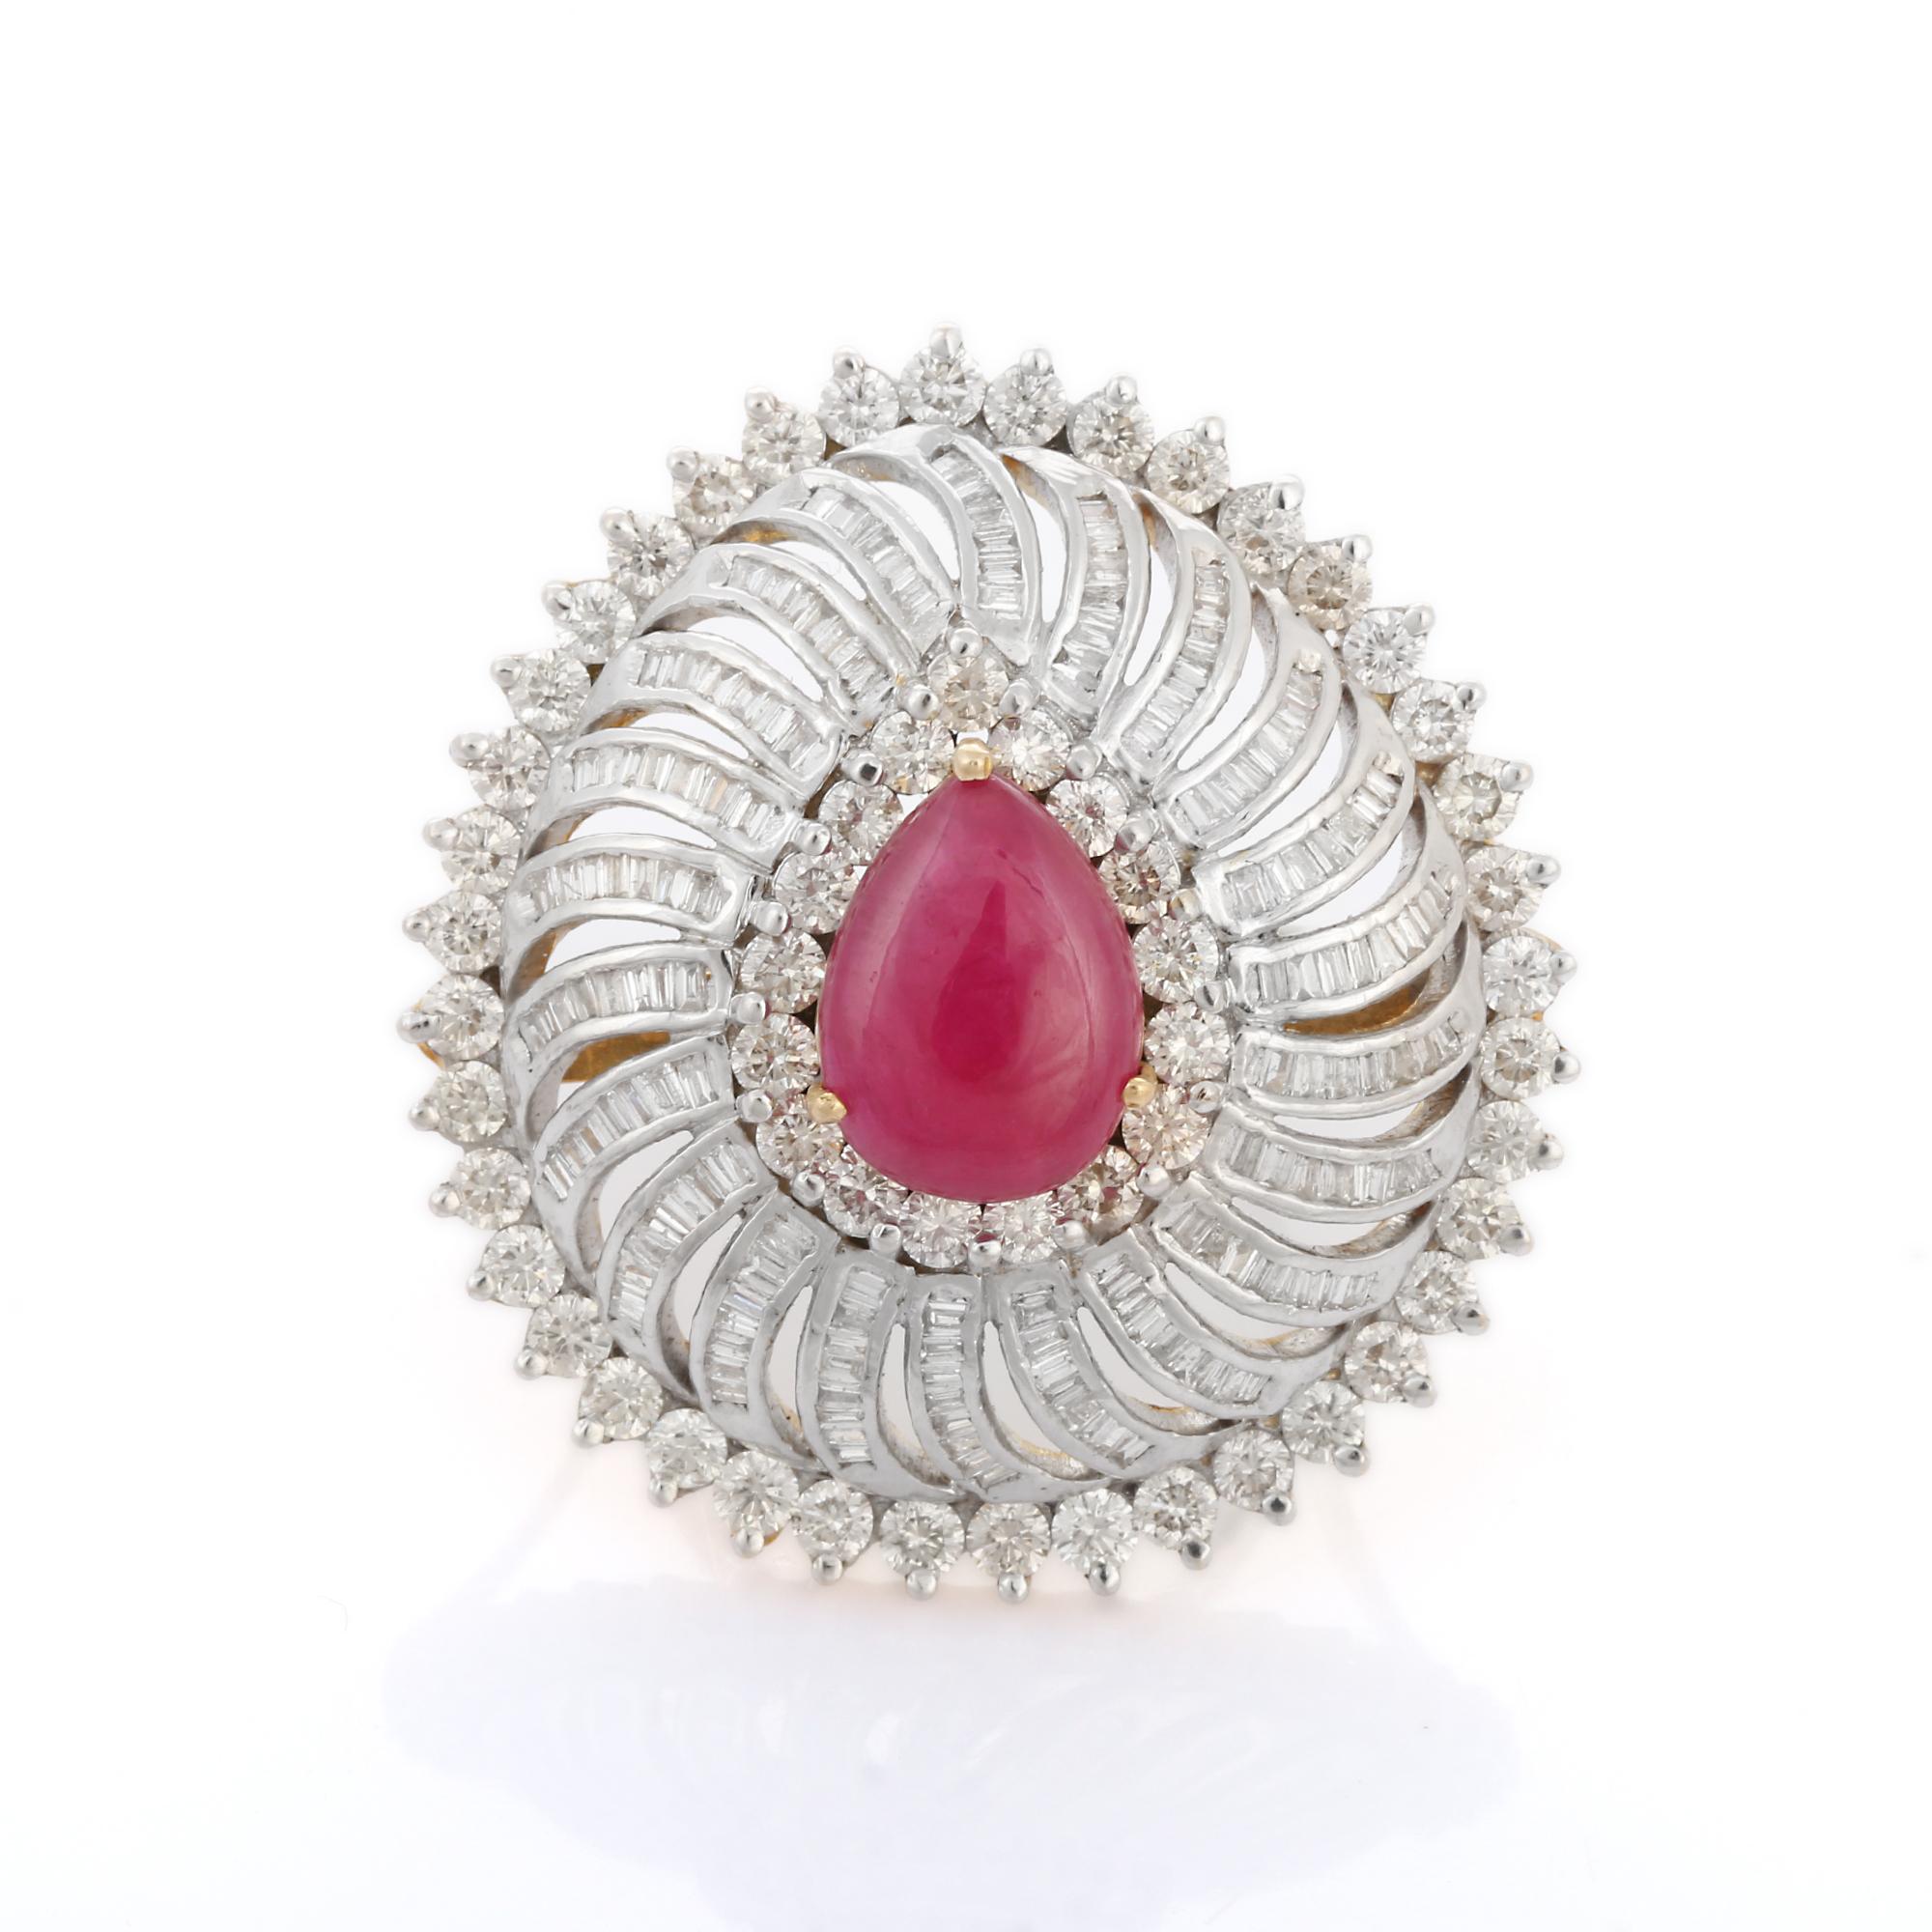 For Sale:  Statement Ruby Cocktail Ring with Halo of Diamonds in 14K White Gold 9